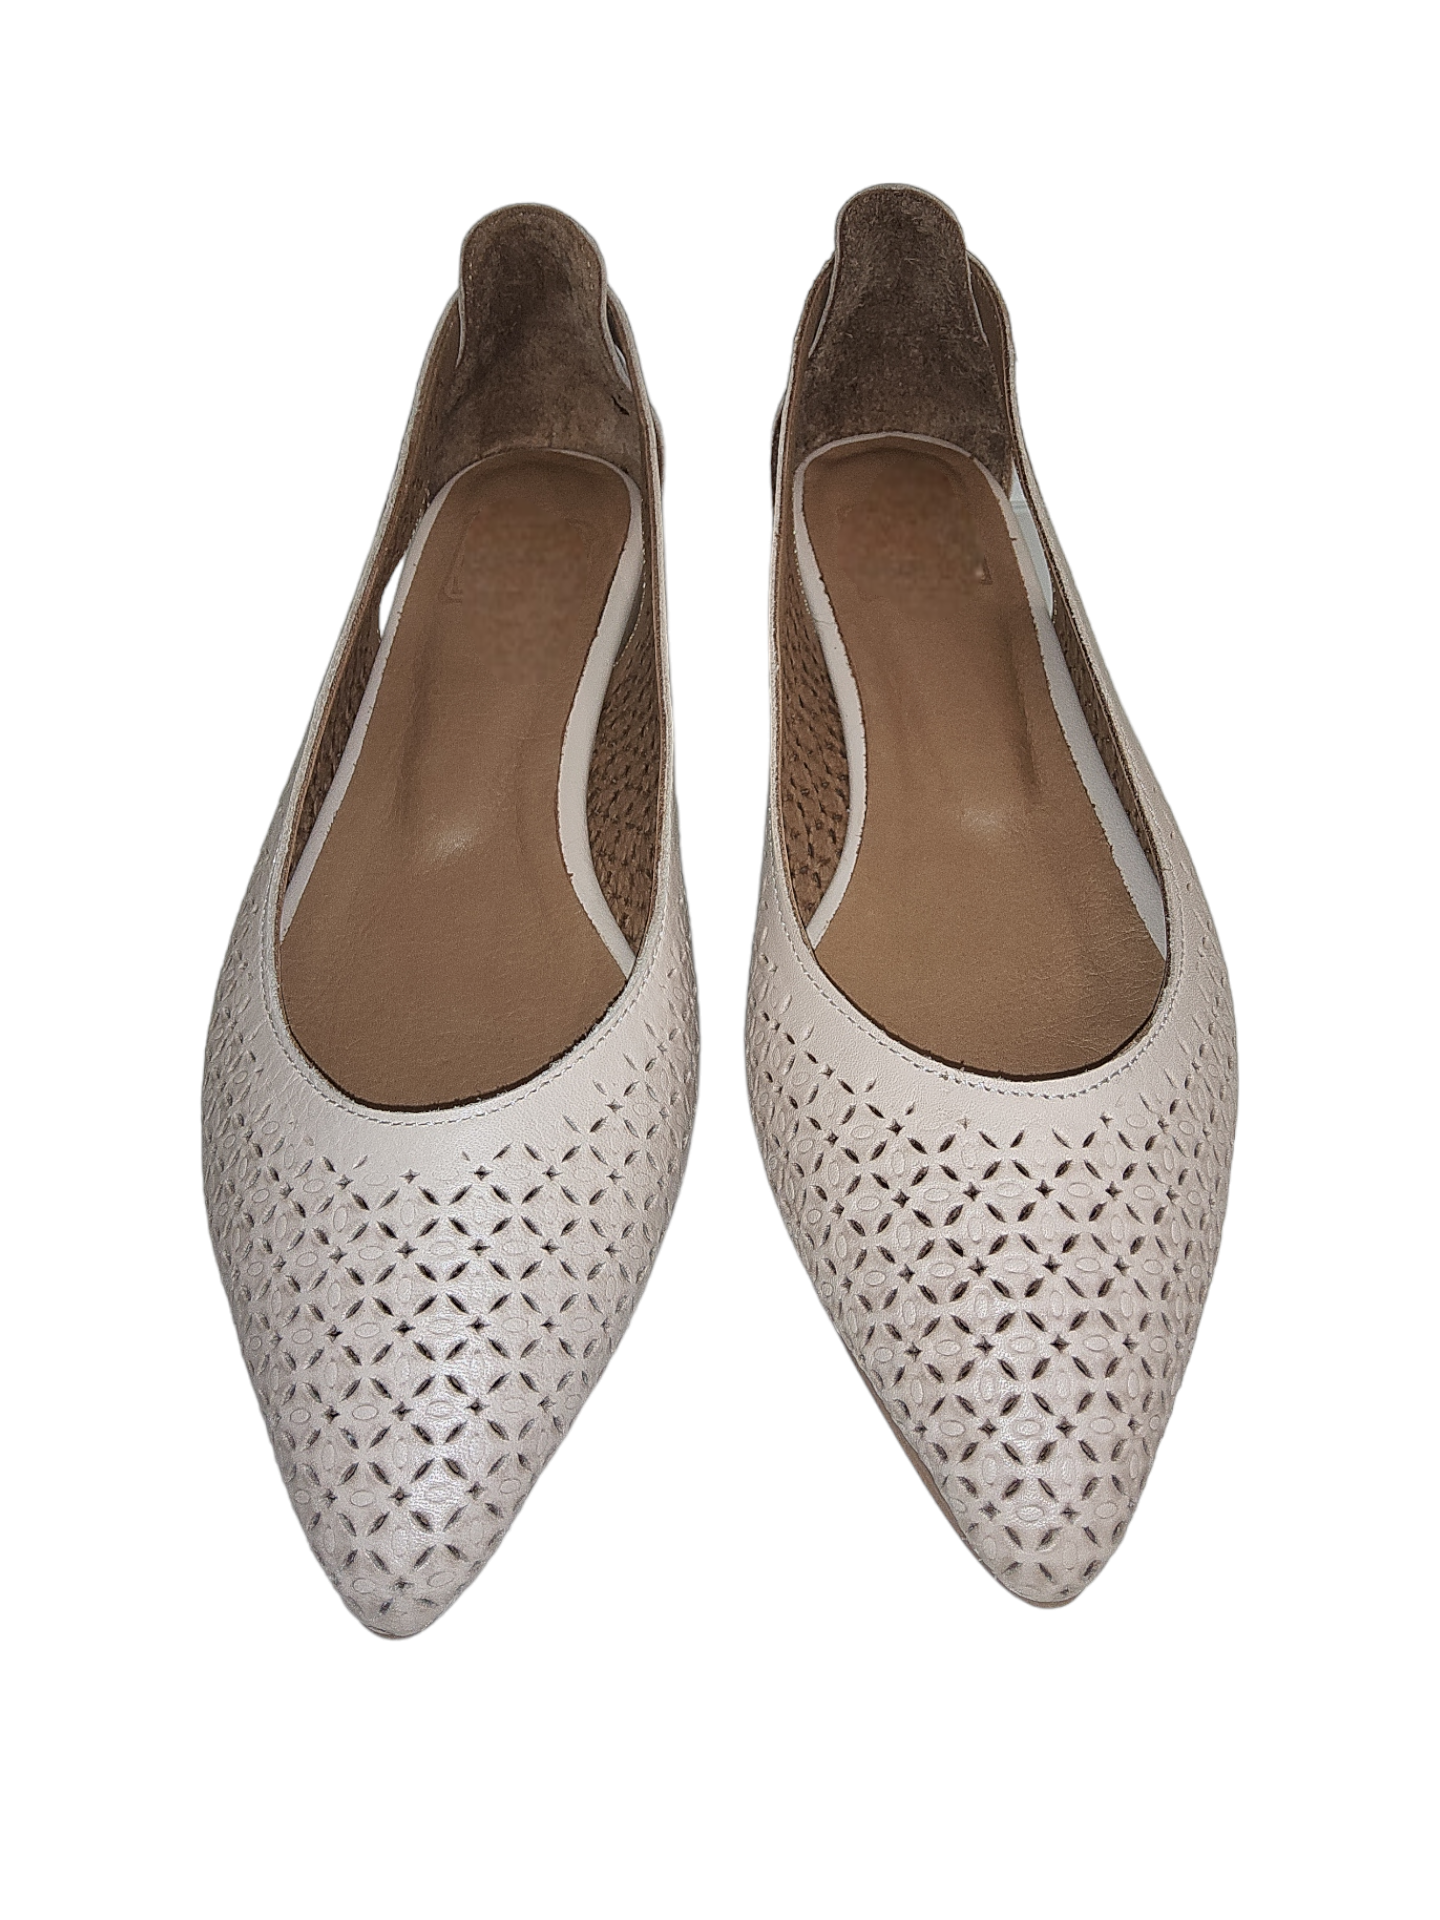 Beige leather pumps